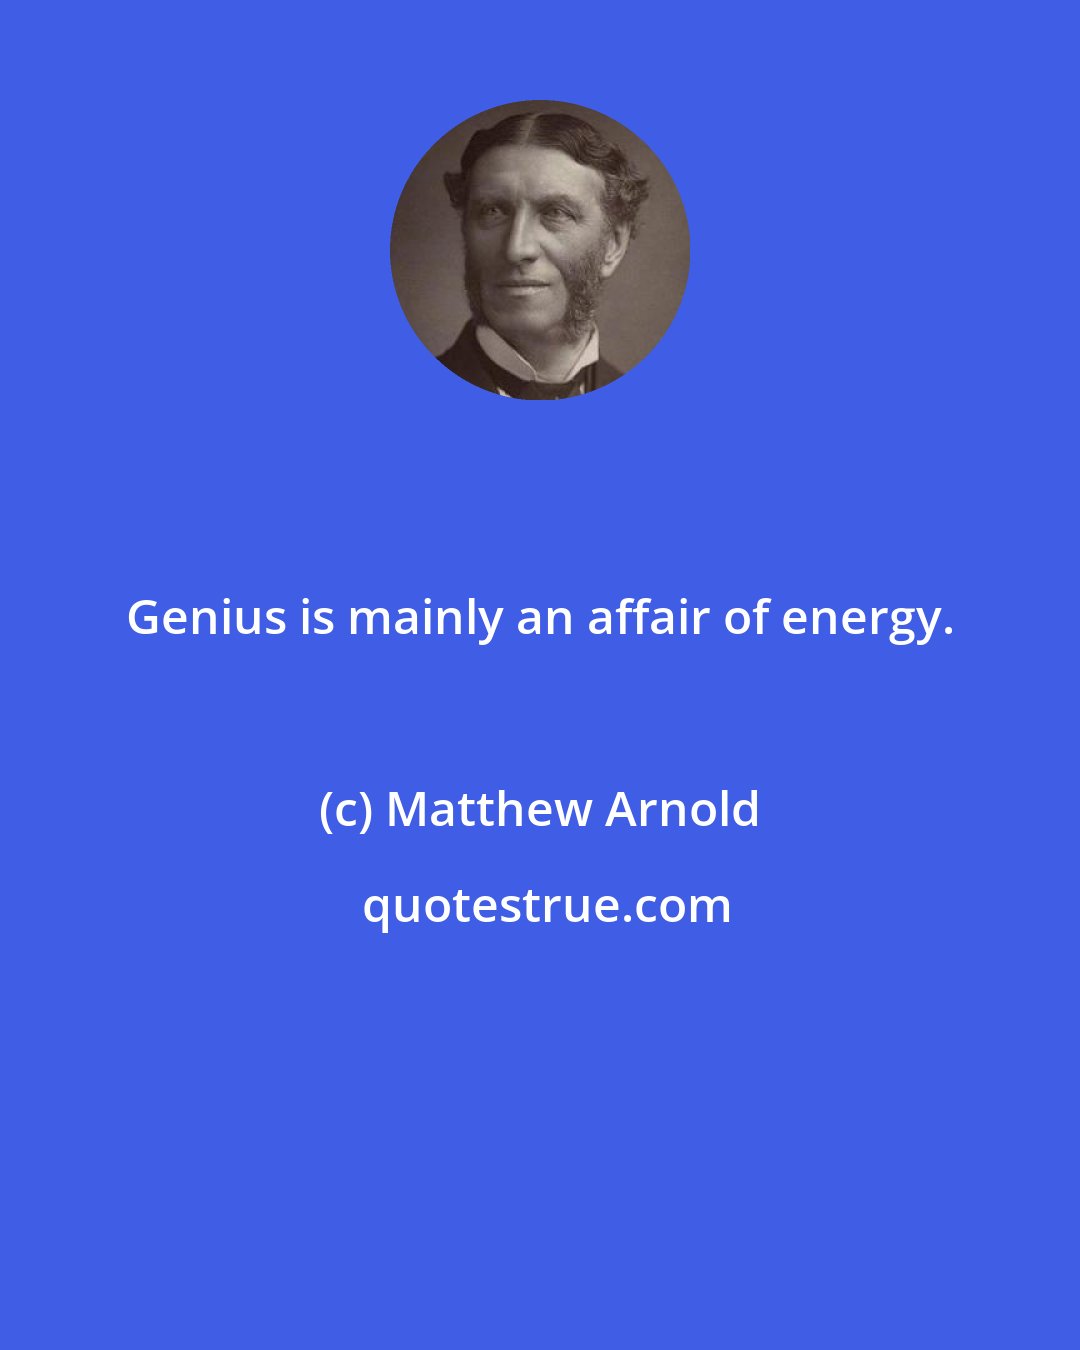 Matthew Arnold: Genius is mainly an affair of energy.